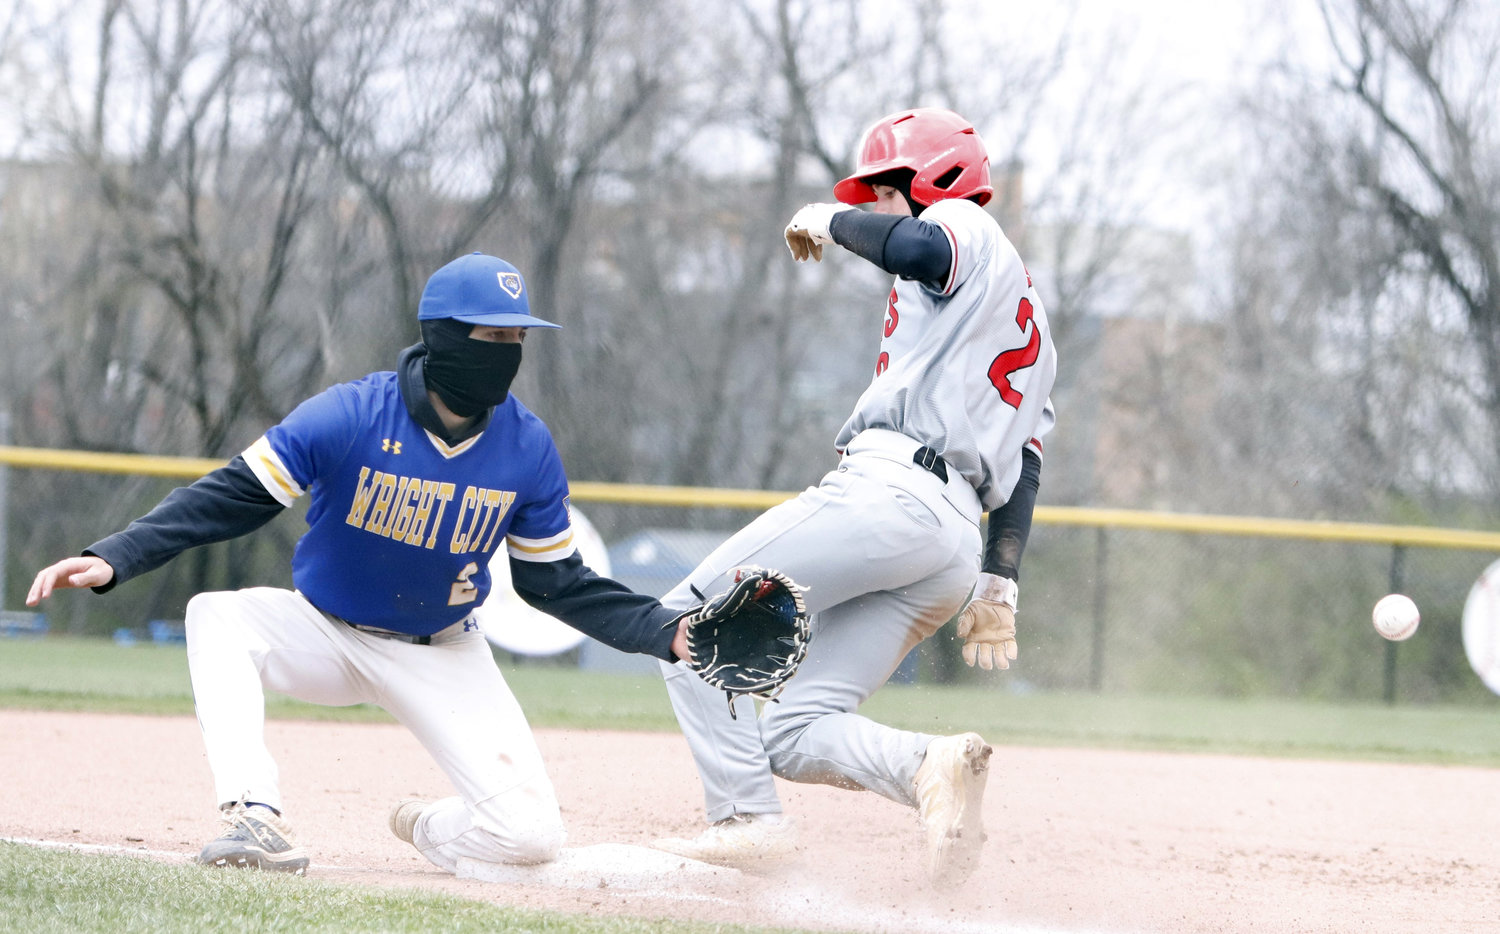 Wright City third baseman Nick Moore (left) prepares to catch a throw as Warrenton's Caleb Clark (right) slides into third base.